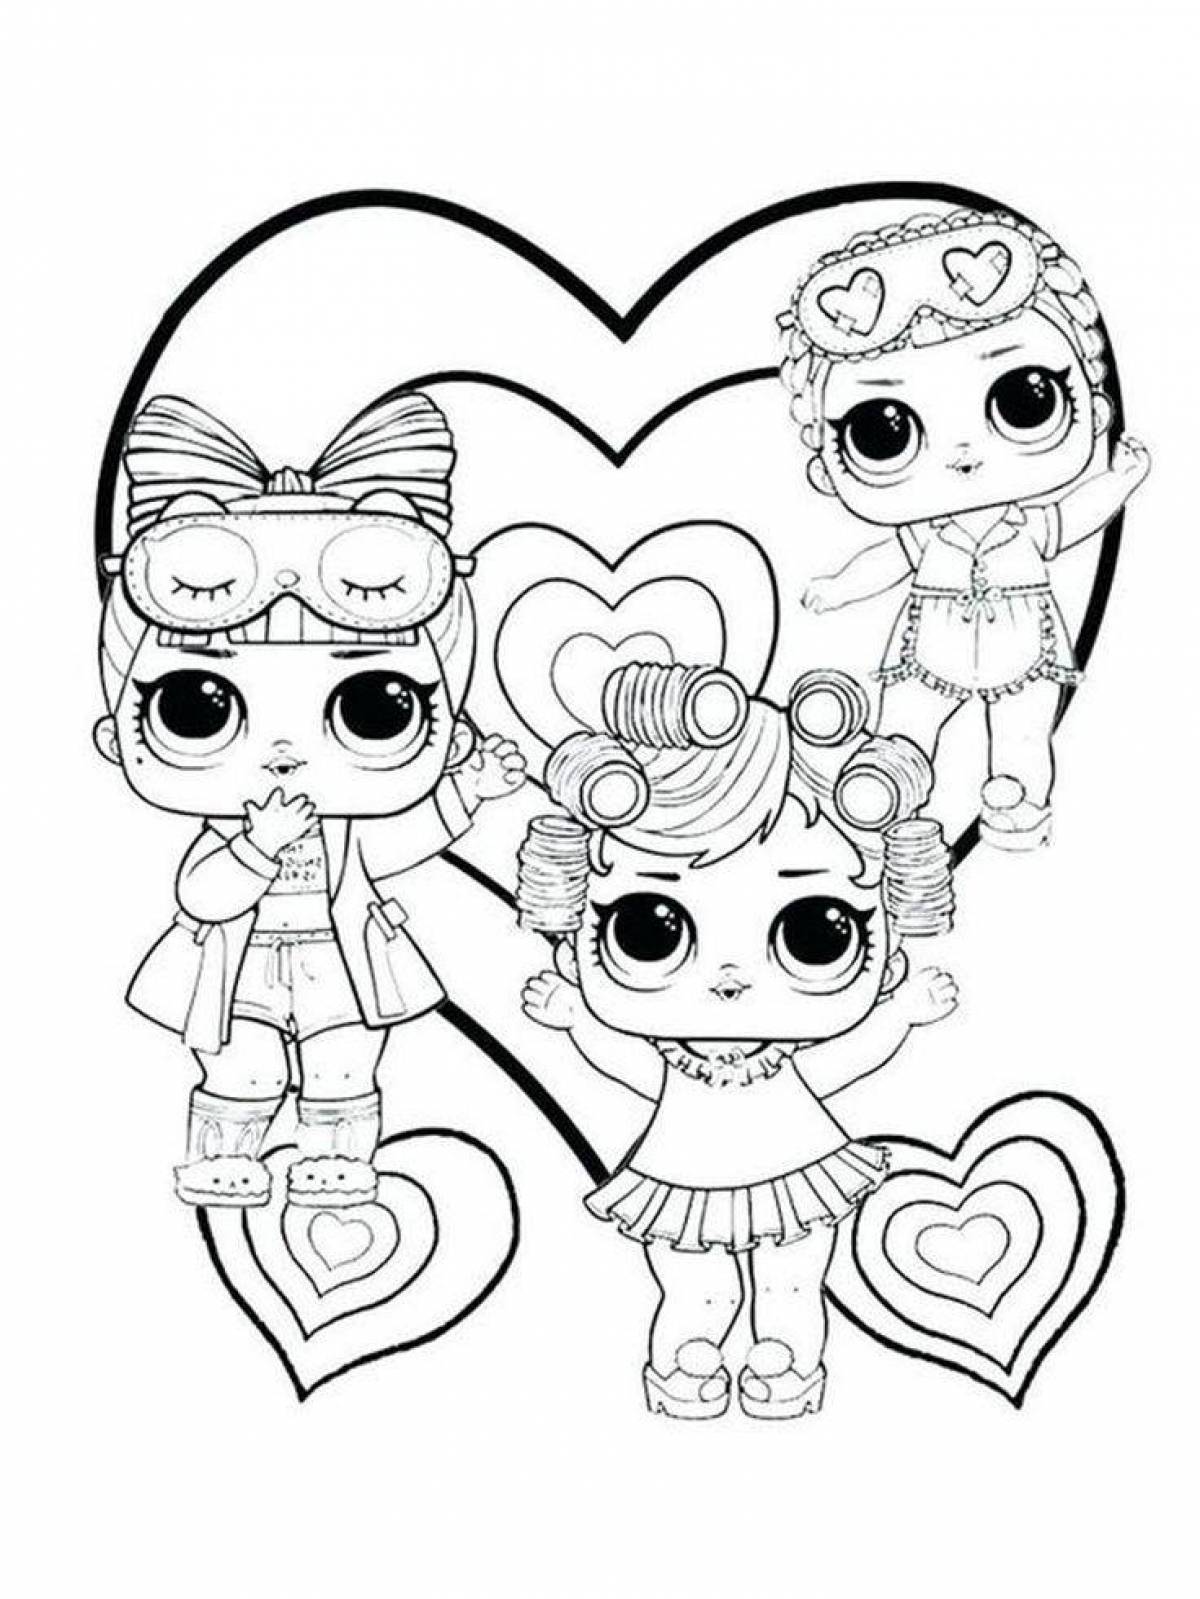 Amazing coloring pages for girls lol new